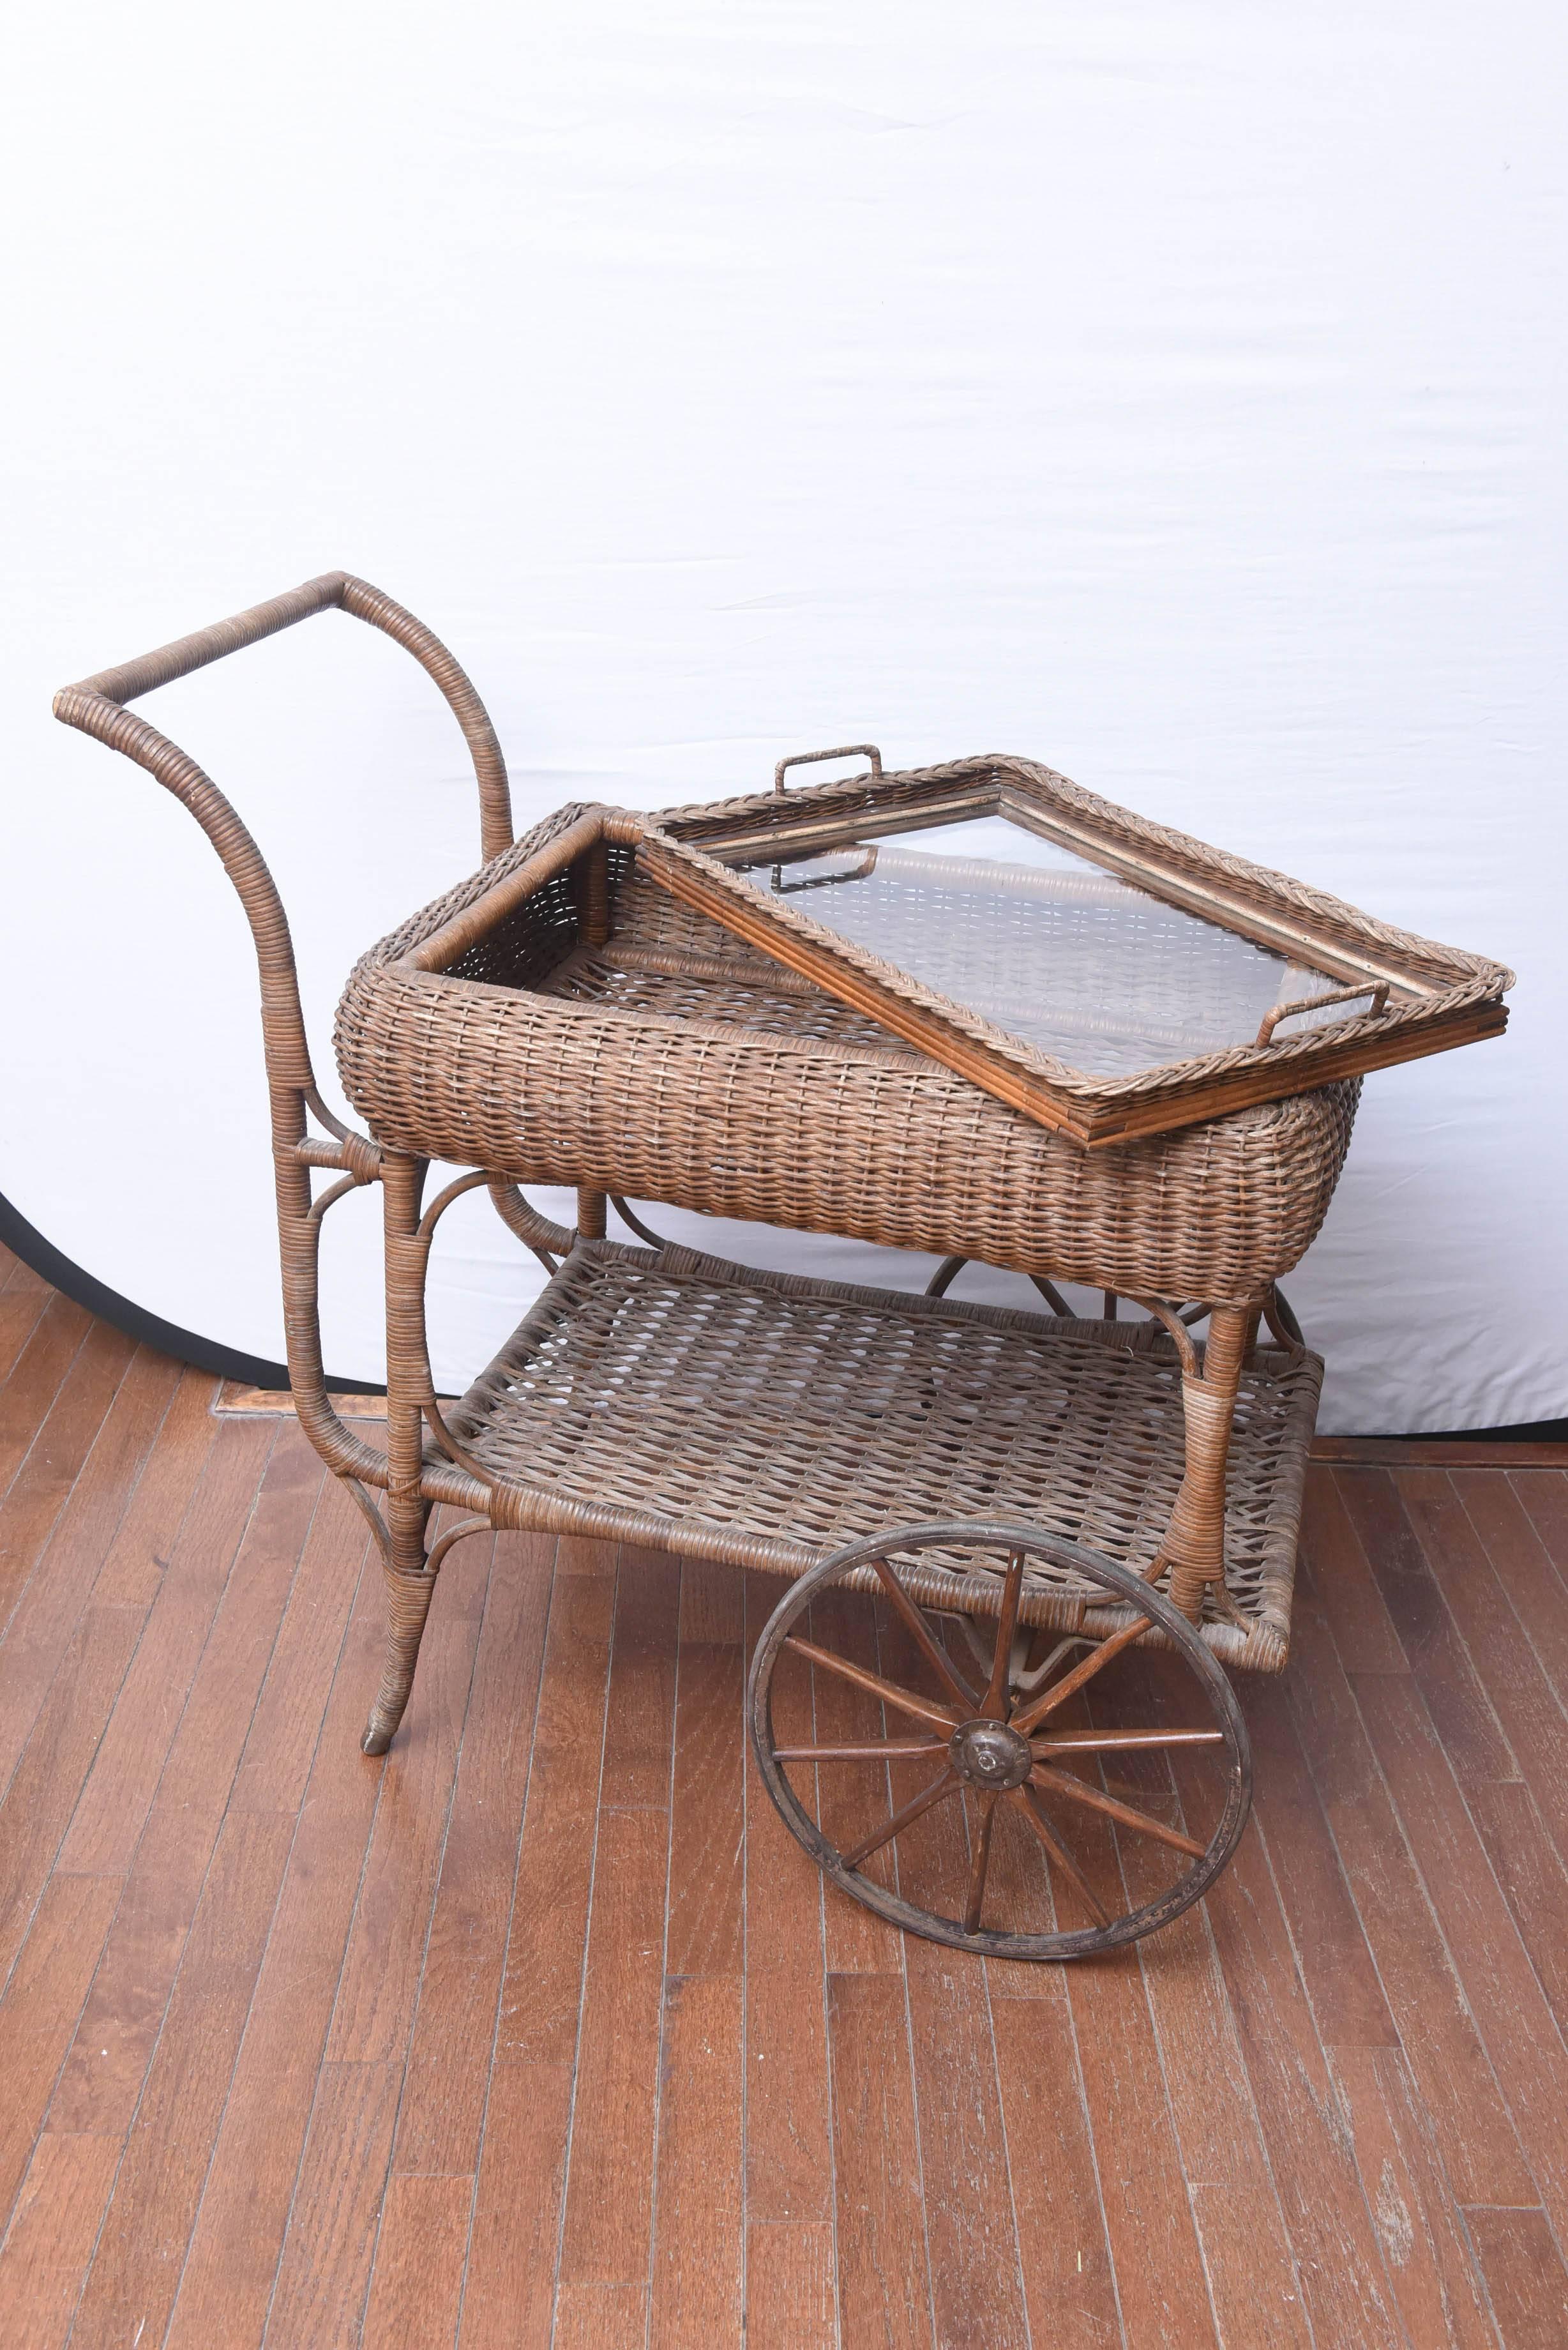 Mid-20th Century Antique All Original Wicker Bar Cart, with Removable Tray for Service